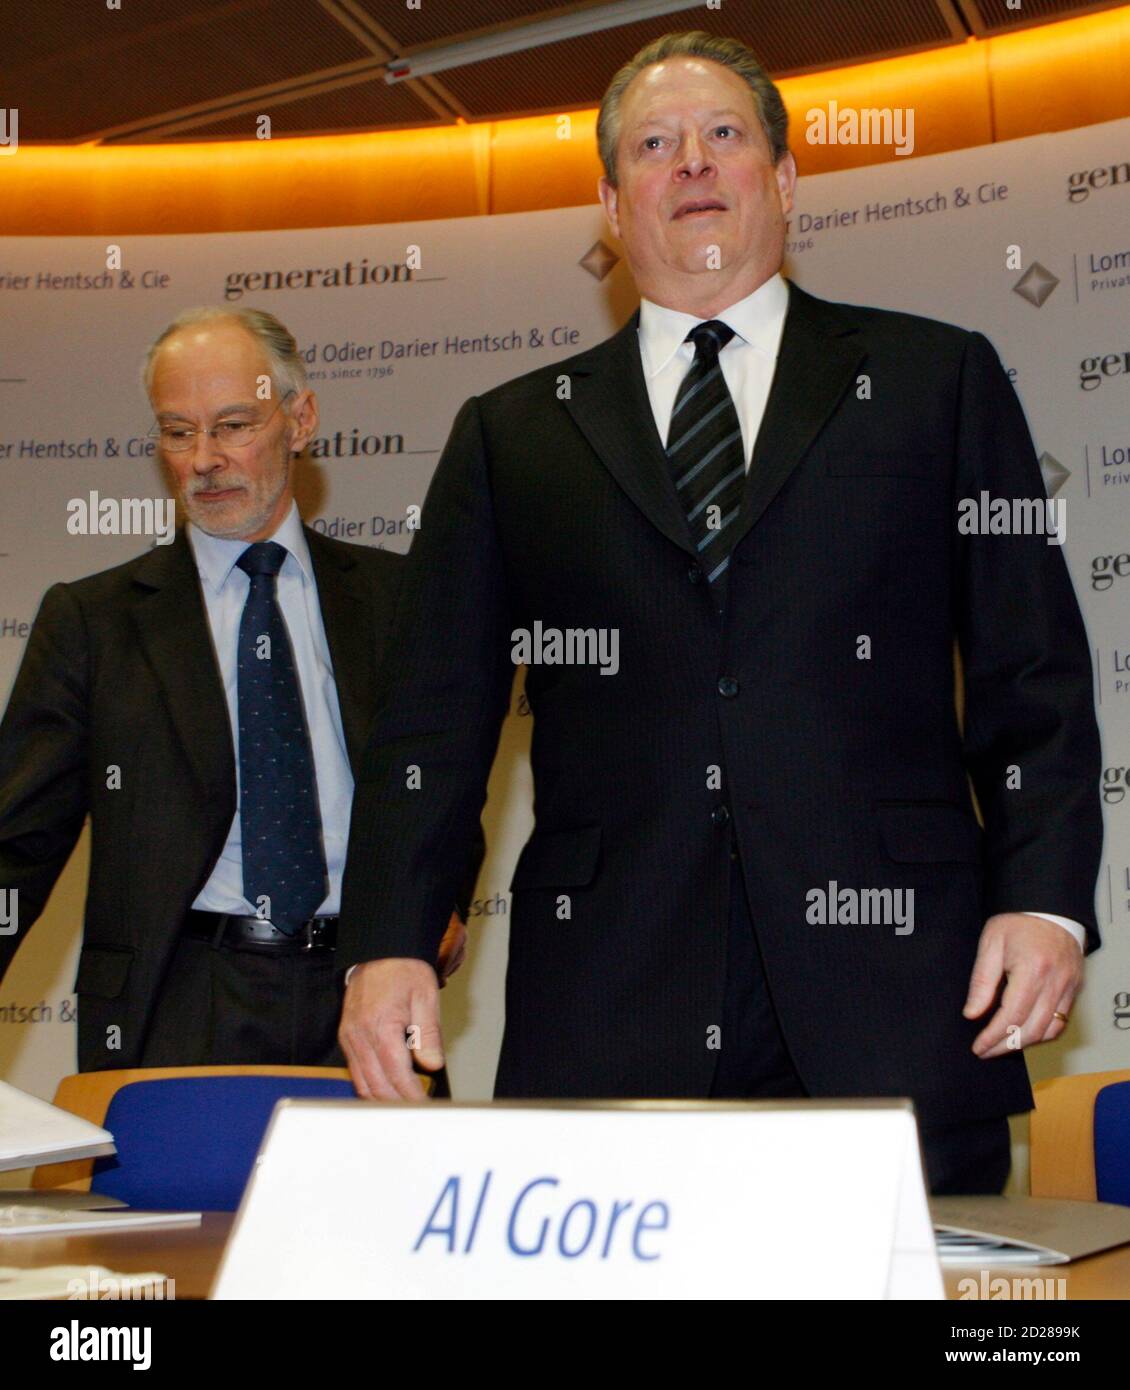 Al Gore (R) Nobel Peace Prize winner and Chairman of Generation Investment Management and Thierry Lombard, Senior Partner LODH arrive for a news conference with Lombard Odier Darier Hentsch (LODH) Private Bank at Cointrin airport in Geneva March 11, 2008. LODH and Generation Investment Management have decided to join forces to promote sustainable investment. REUTERS/Denis Balibouse   (SWITZERLAND) Stock Photo